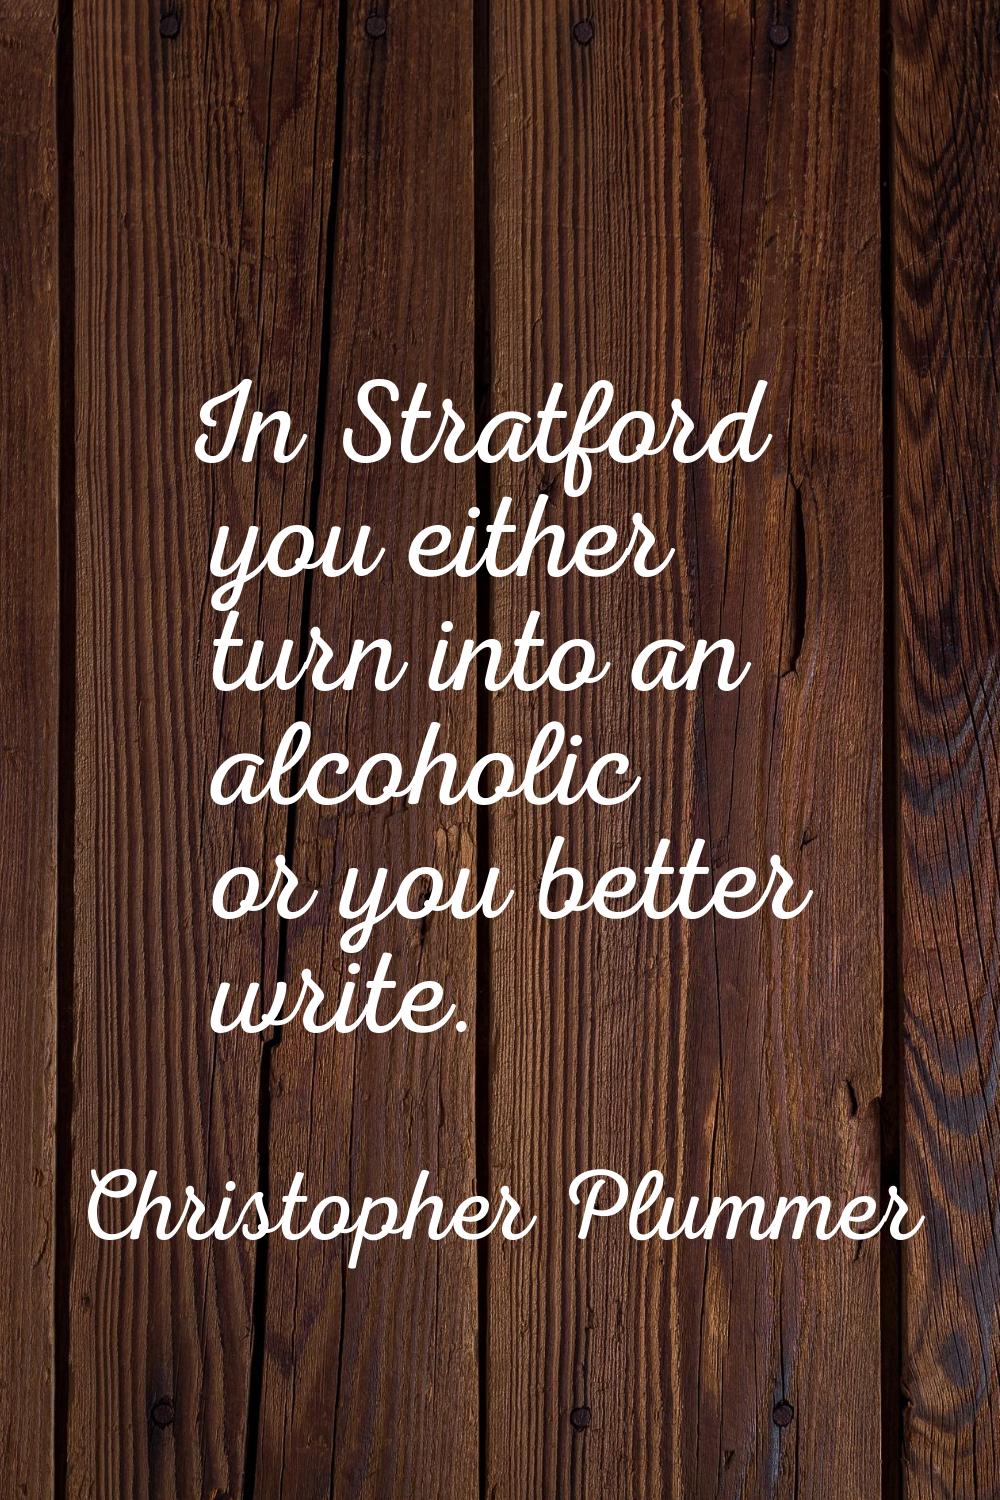 In Stratford you either turn into an alcoholic or you better write.